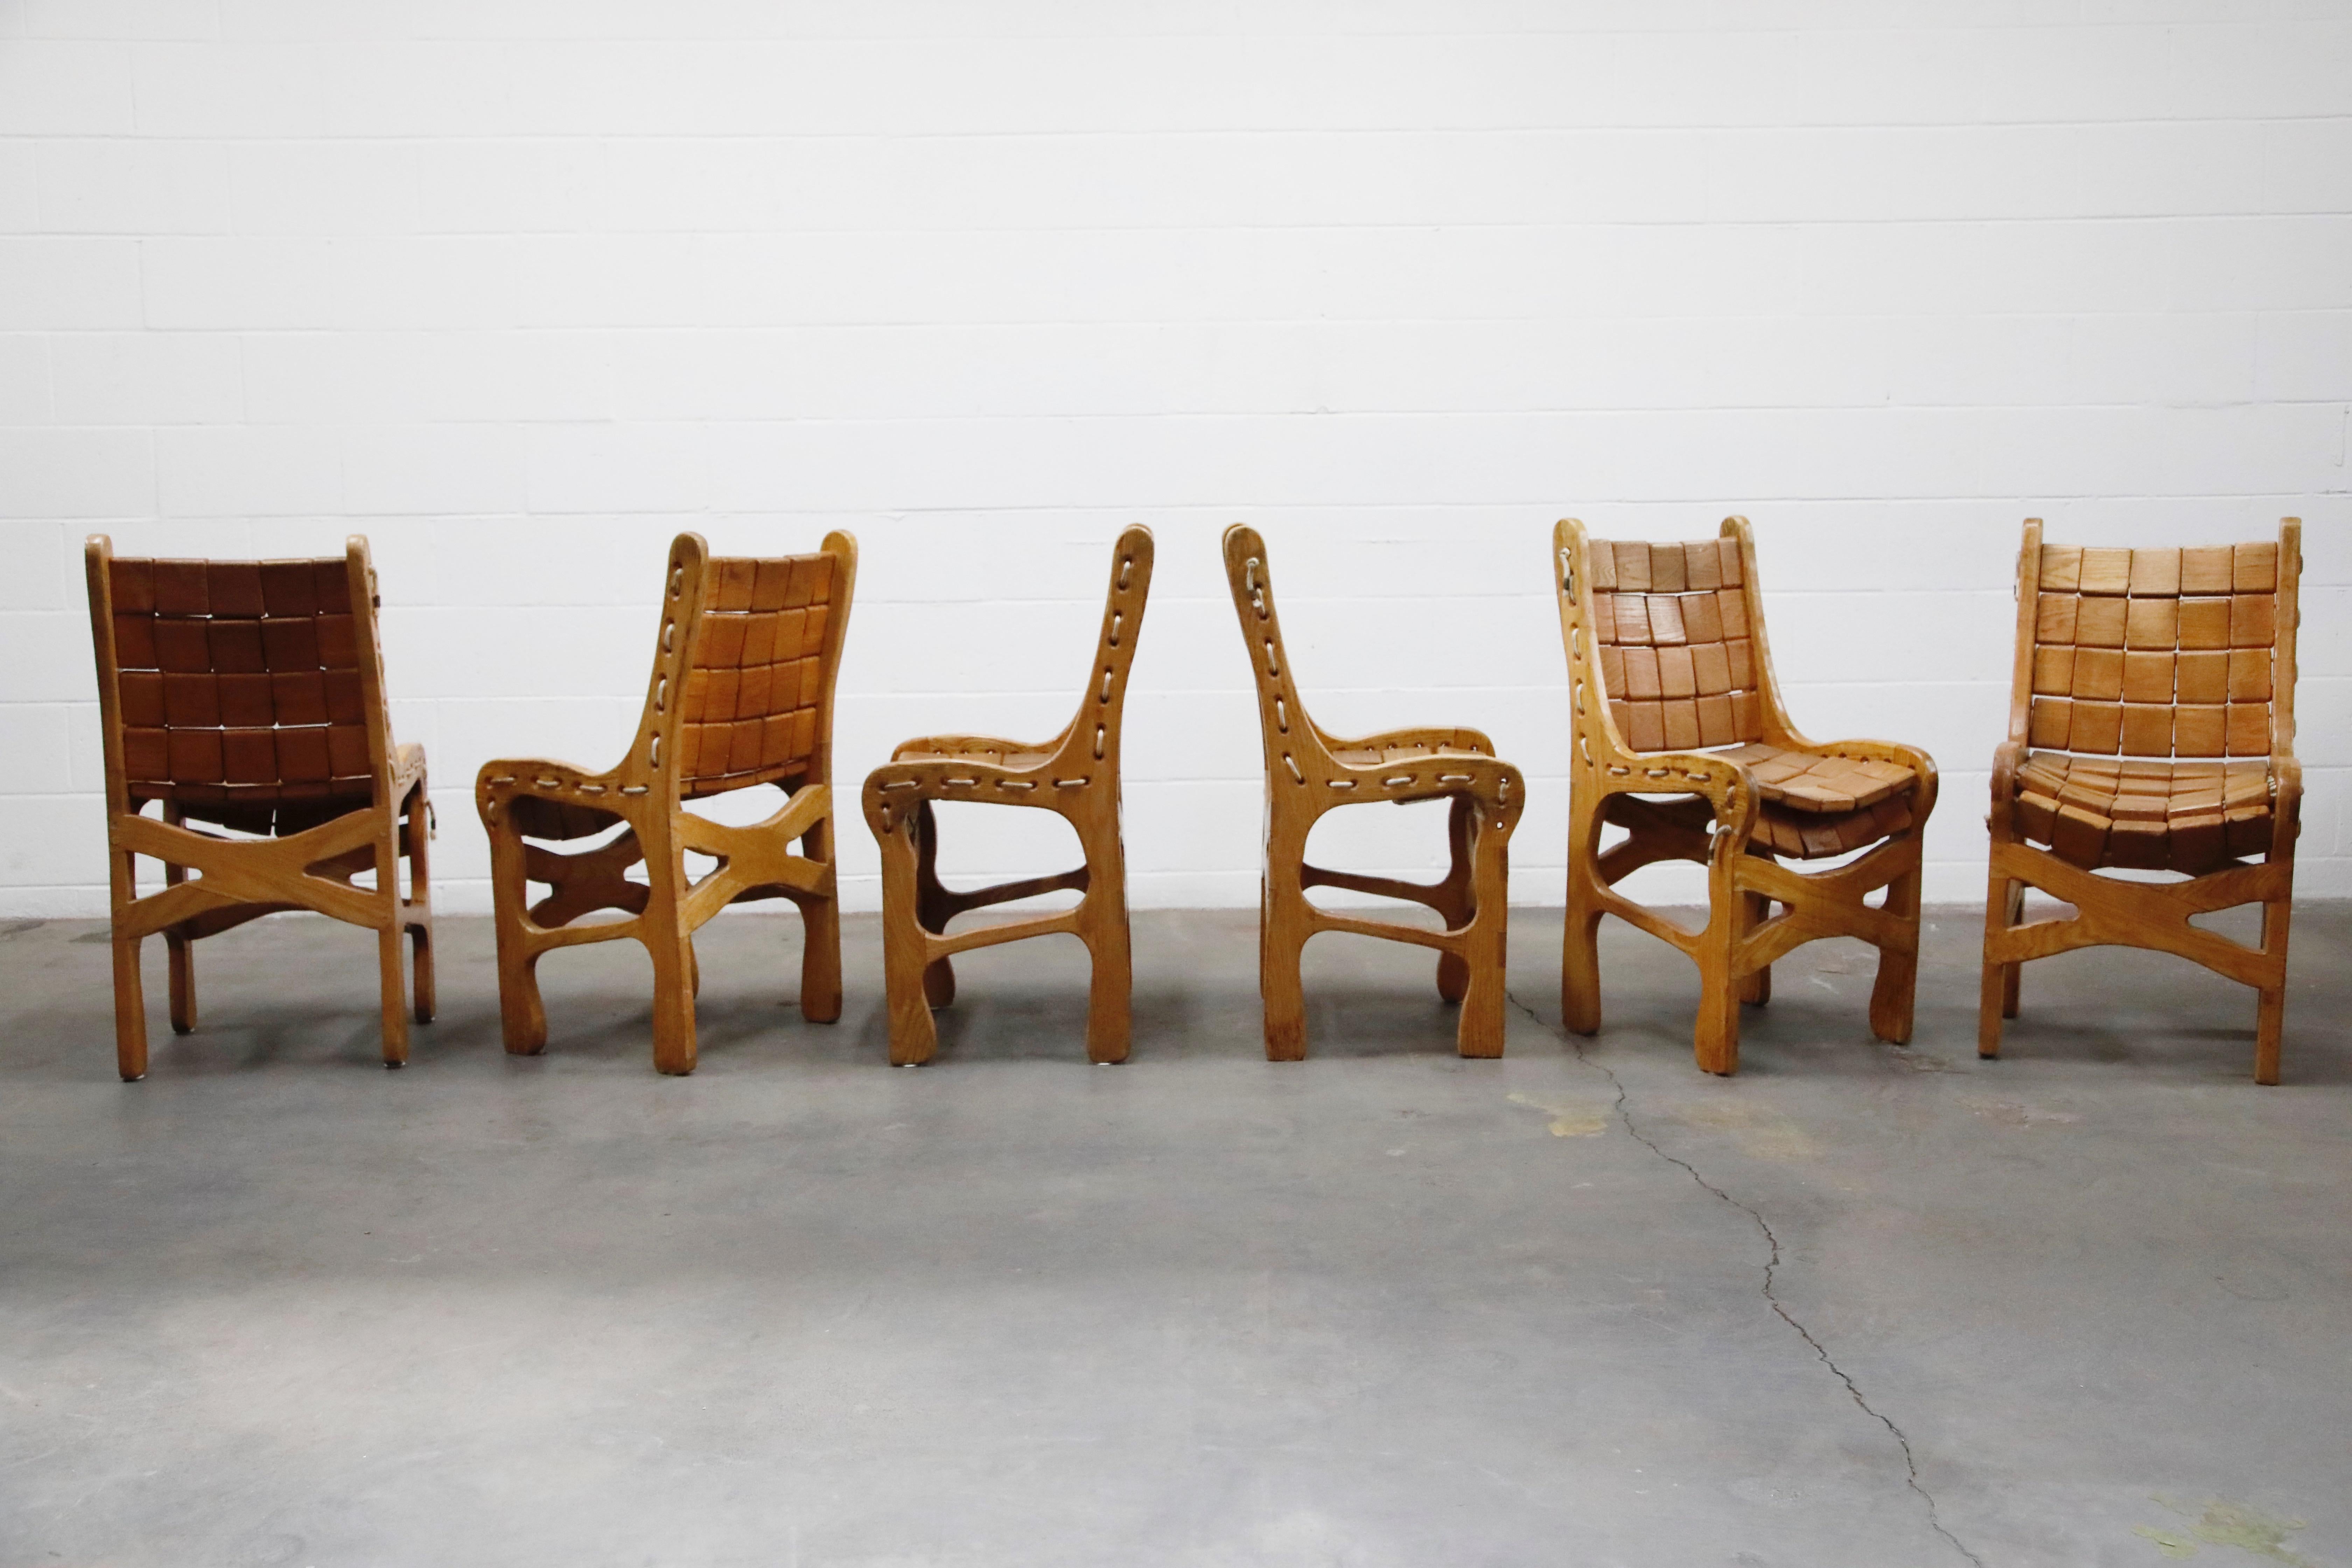 These unique and interesting wood block chairs are by craftsman Jim Geier for his Vermont Folk Rocker Company, circa 1970s. Crafted from oak and rope, this set of 6 Shaker styled chairs are priced as a set. 

From Vermont Folk Rocker website: The